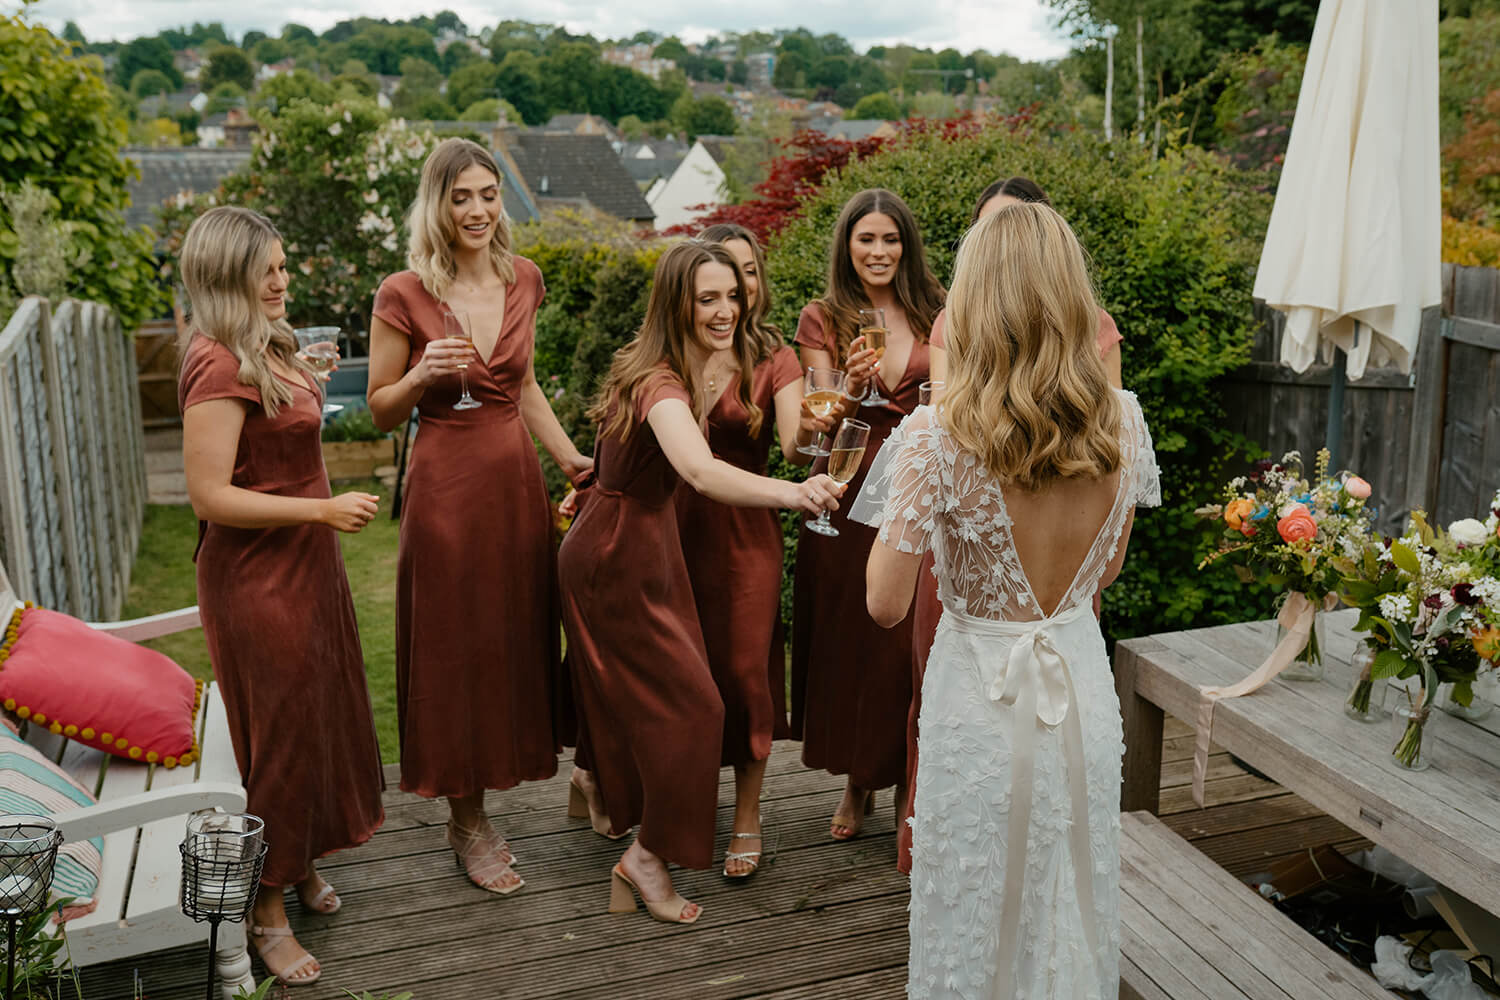 Luci with her bridesmaids